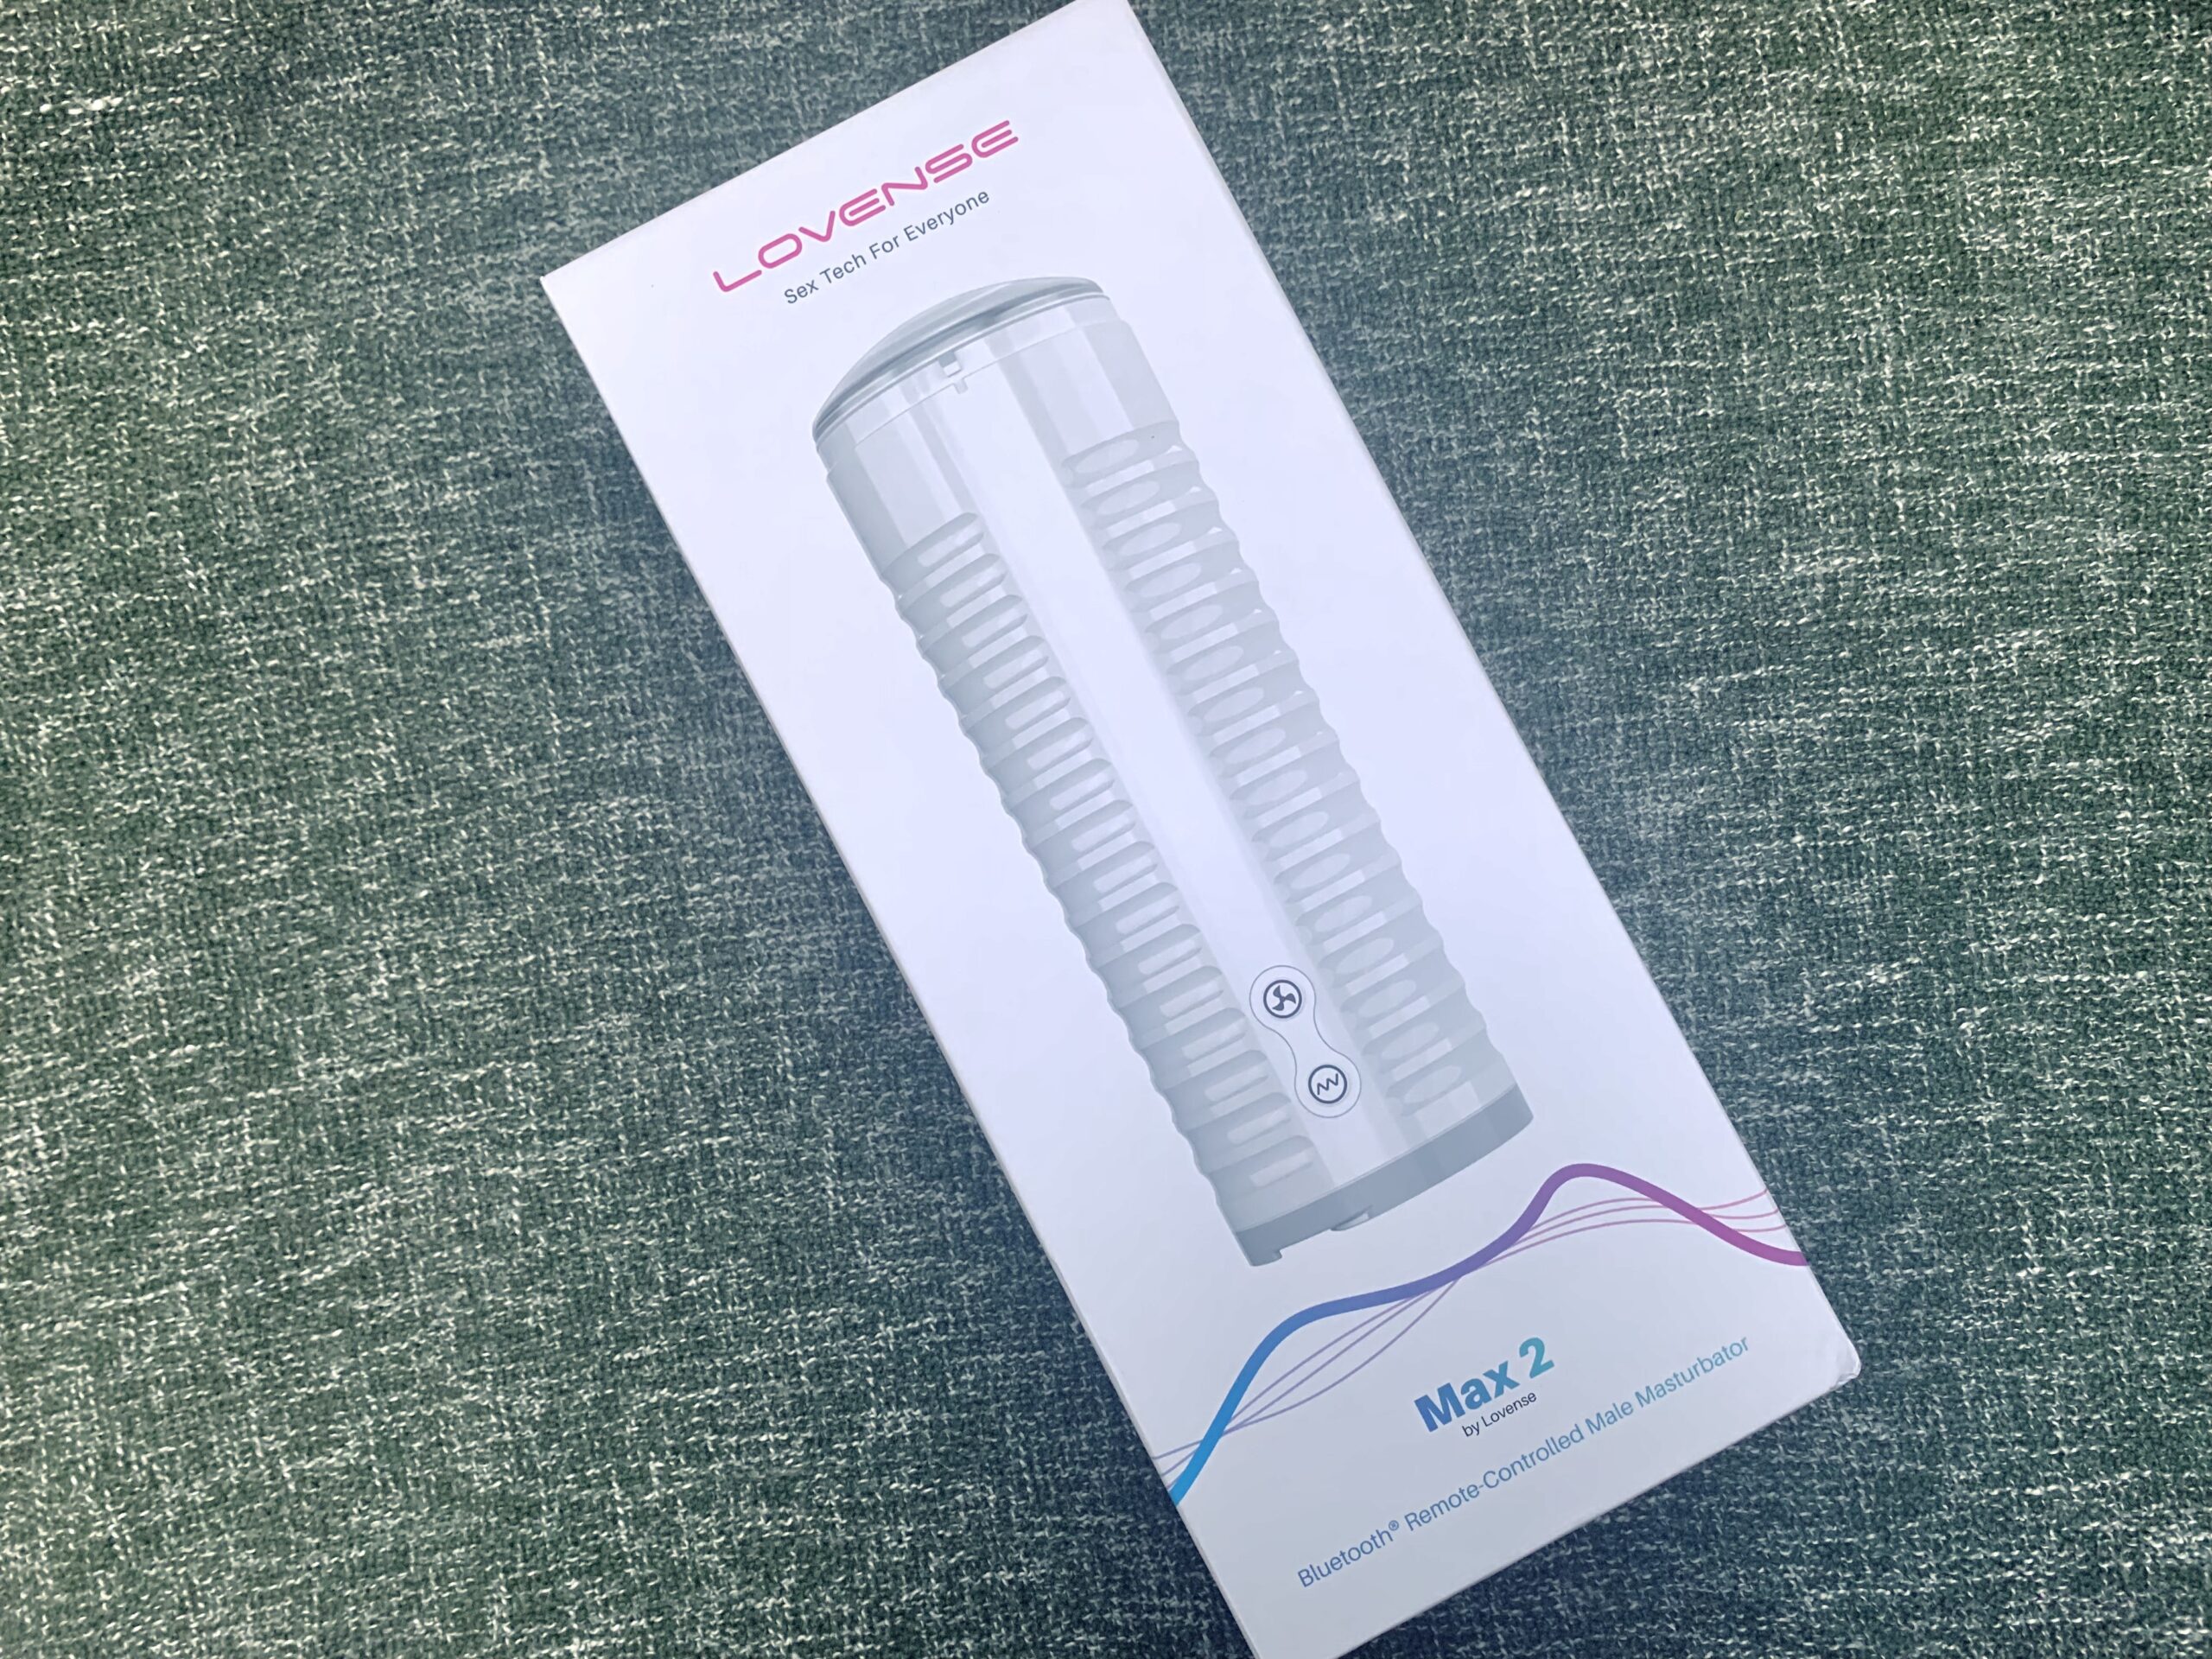 Lovense Max 2 App Controlled Rechargeable Vibrating Male Masturbator. Slide 6